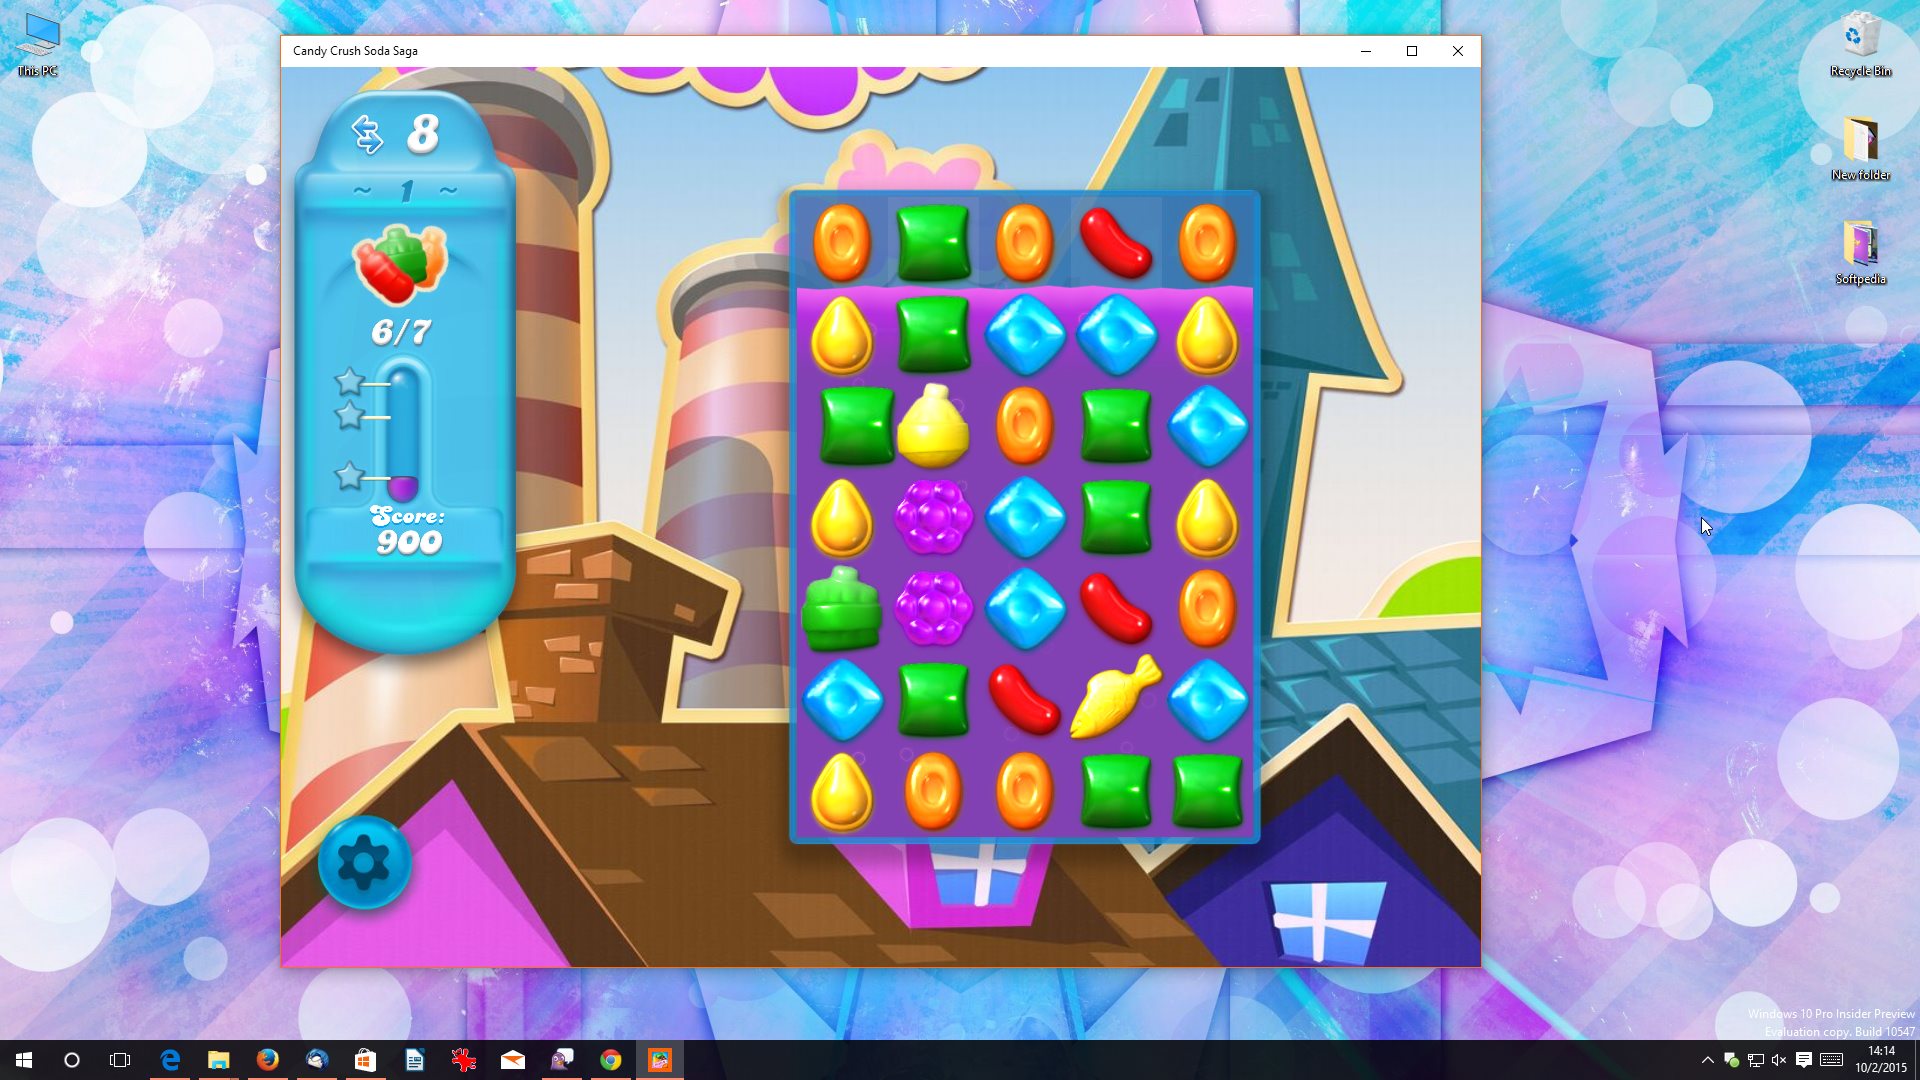 candy crush soda free download for pc